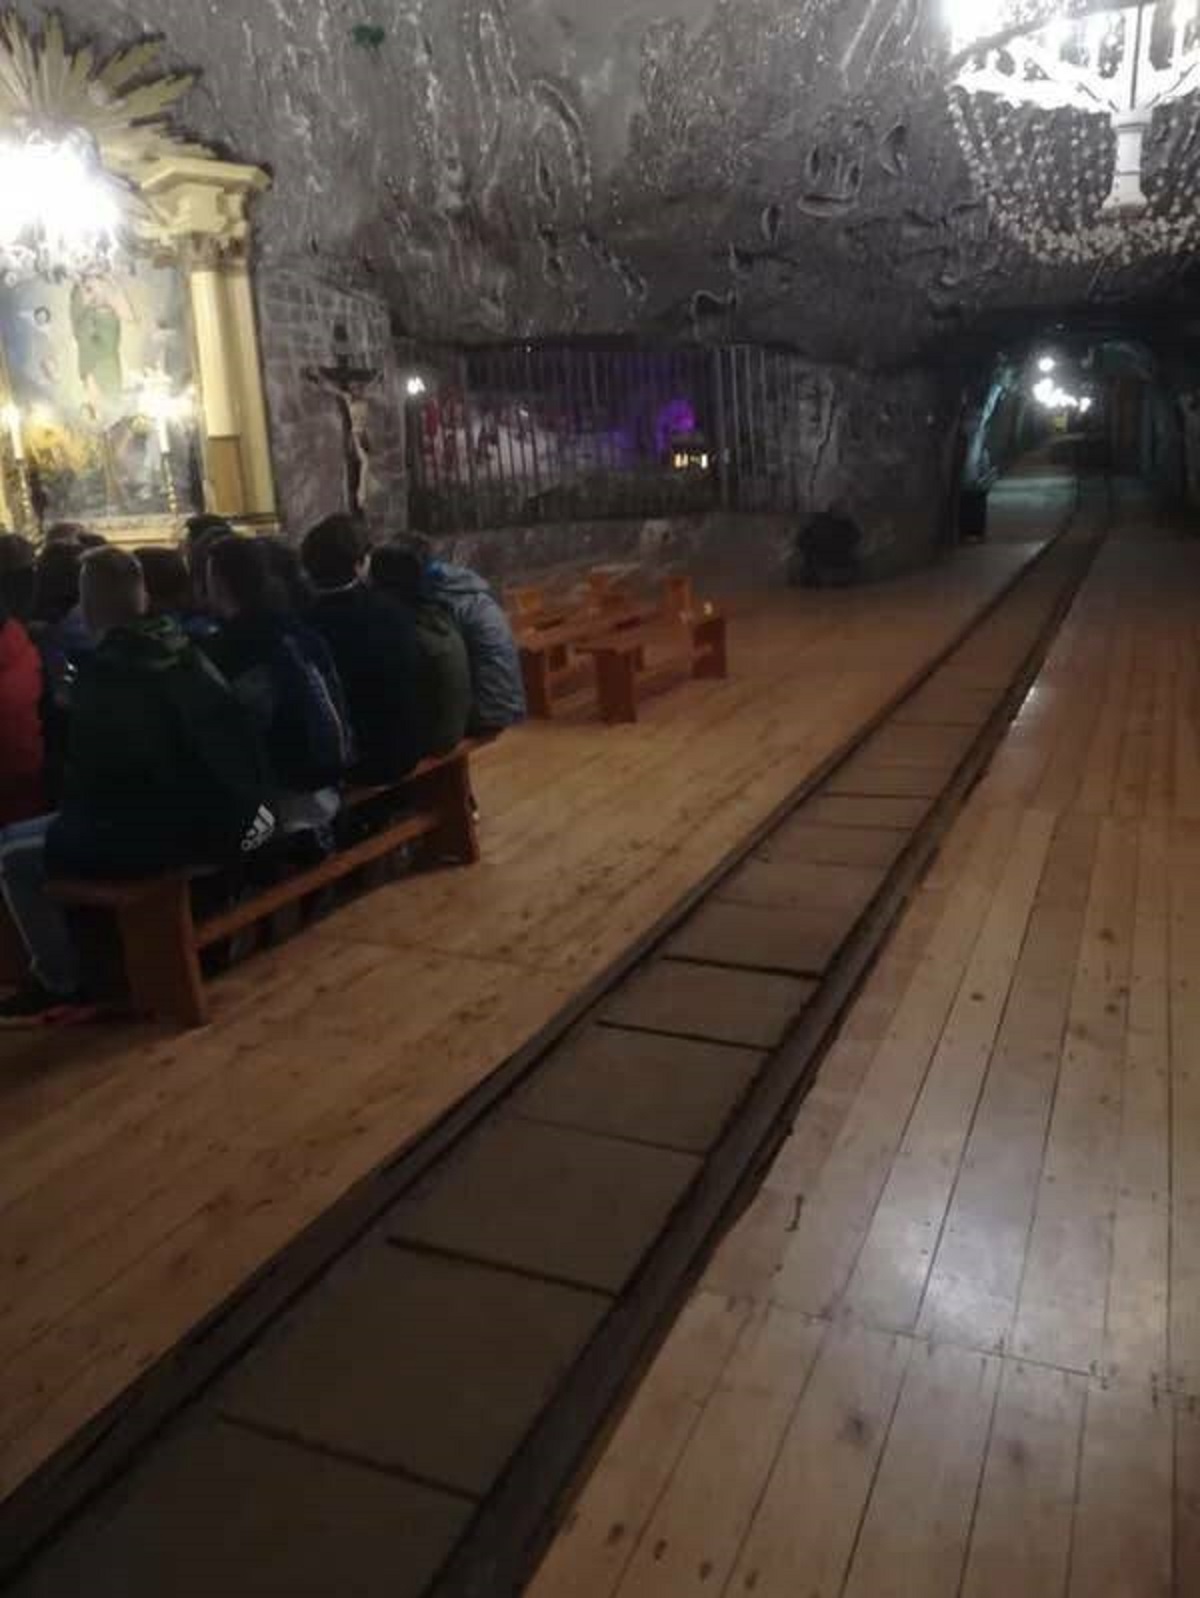 As is this really cool underground church in Poland that literally has a train go through it.